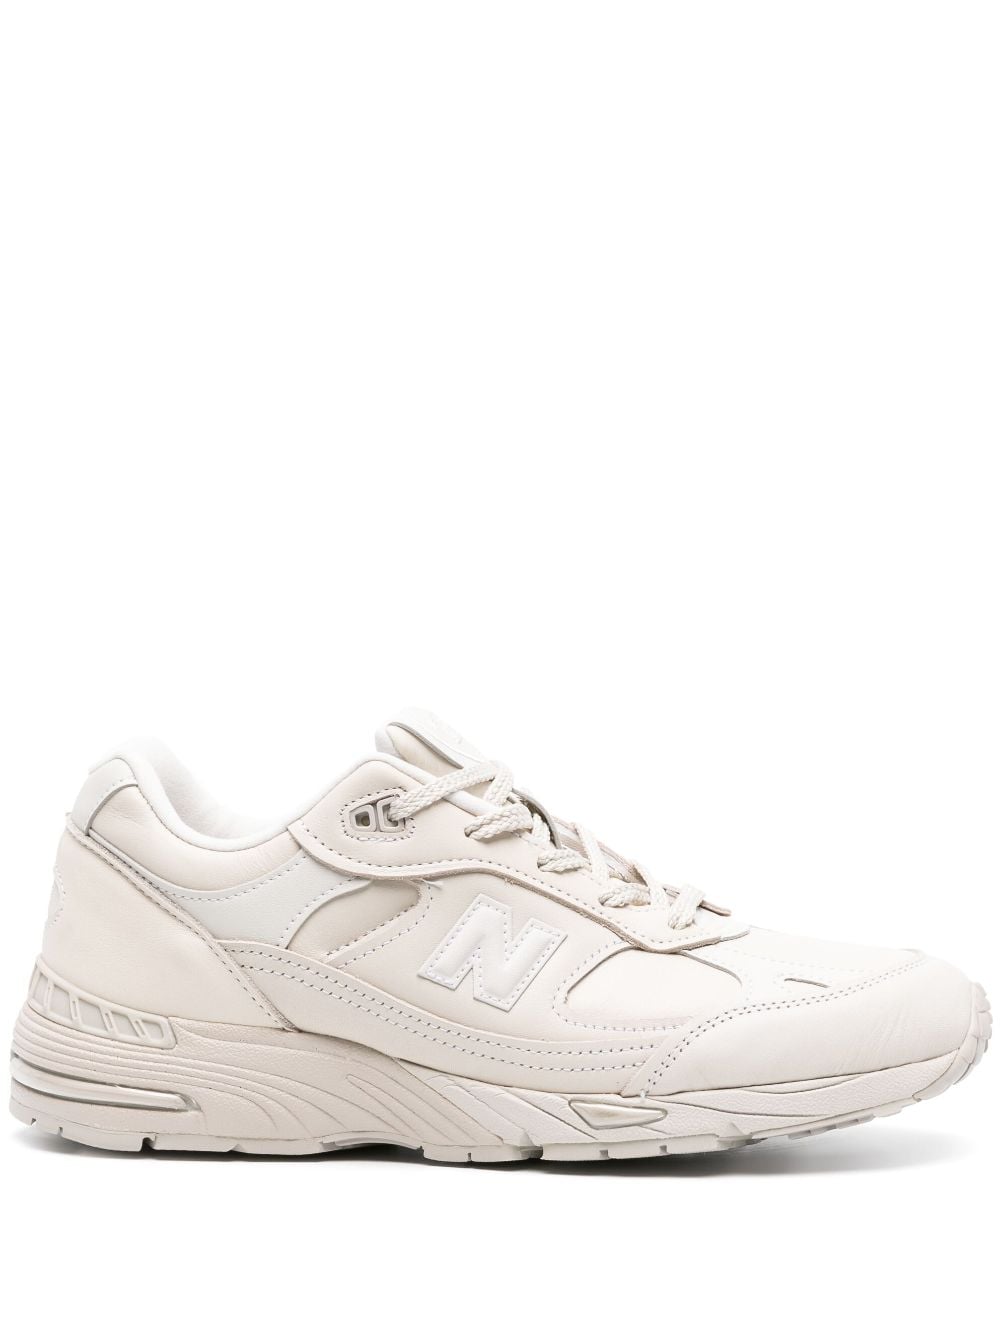 New Balance Made in UK 991 sneakers - Grey von New Balance